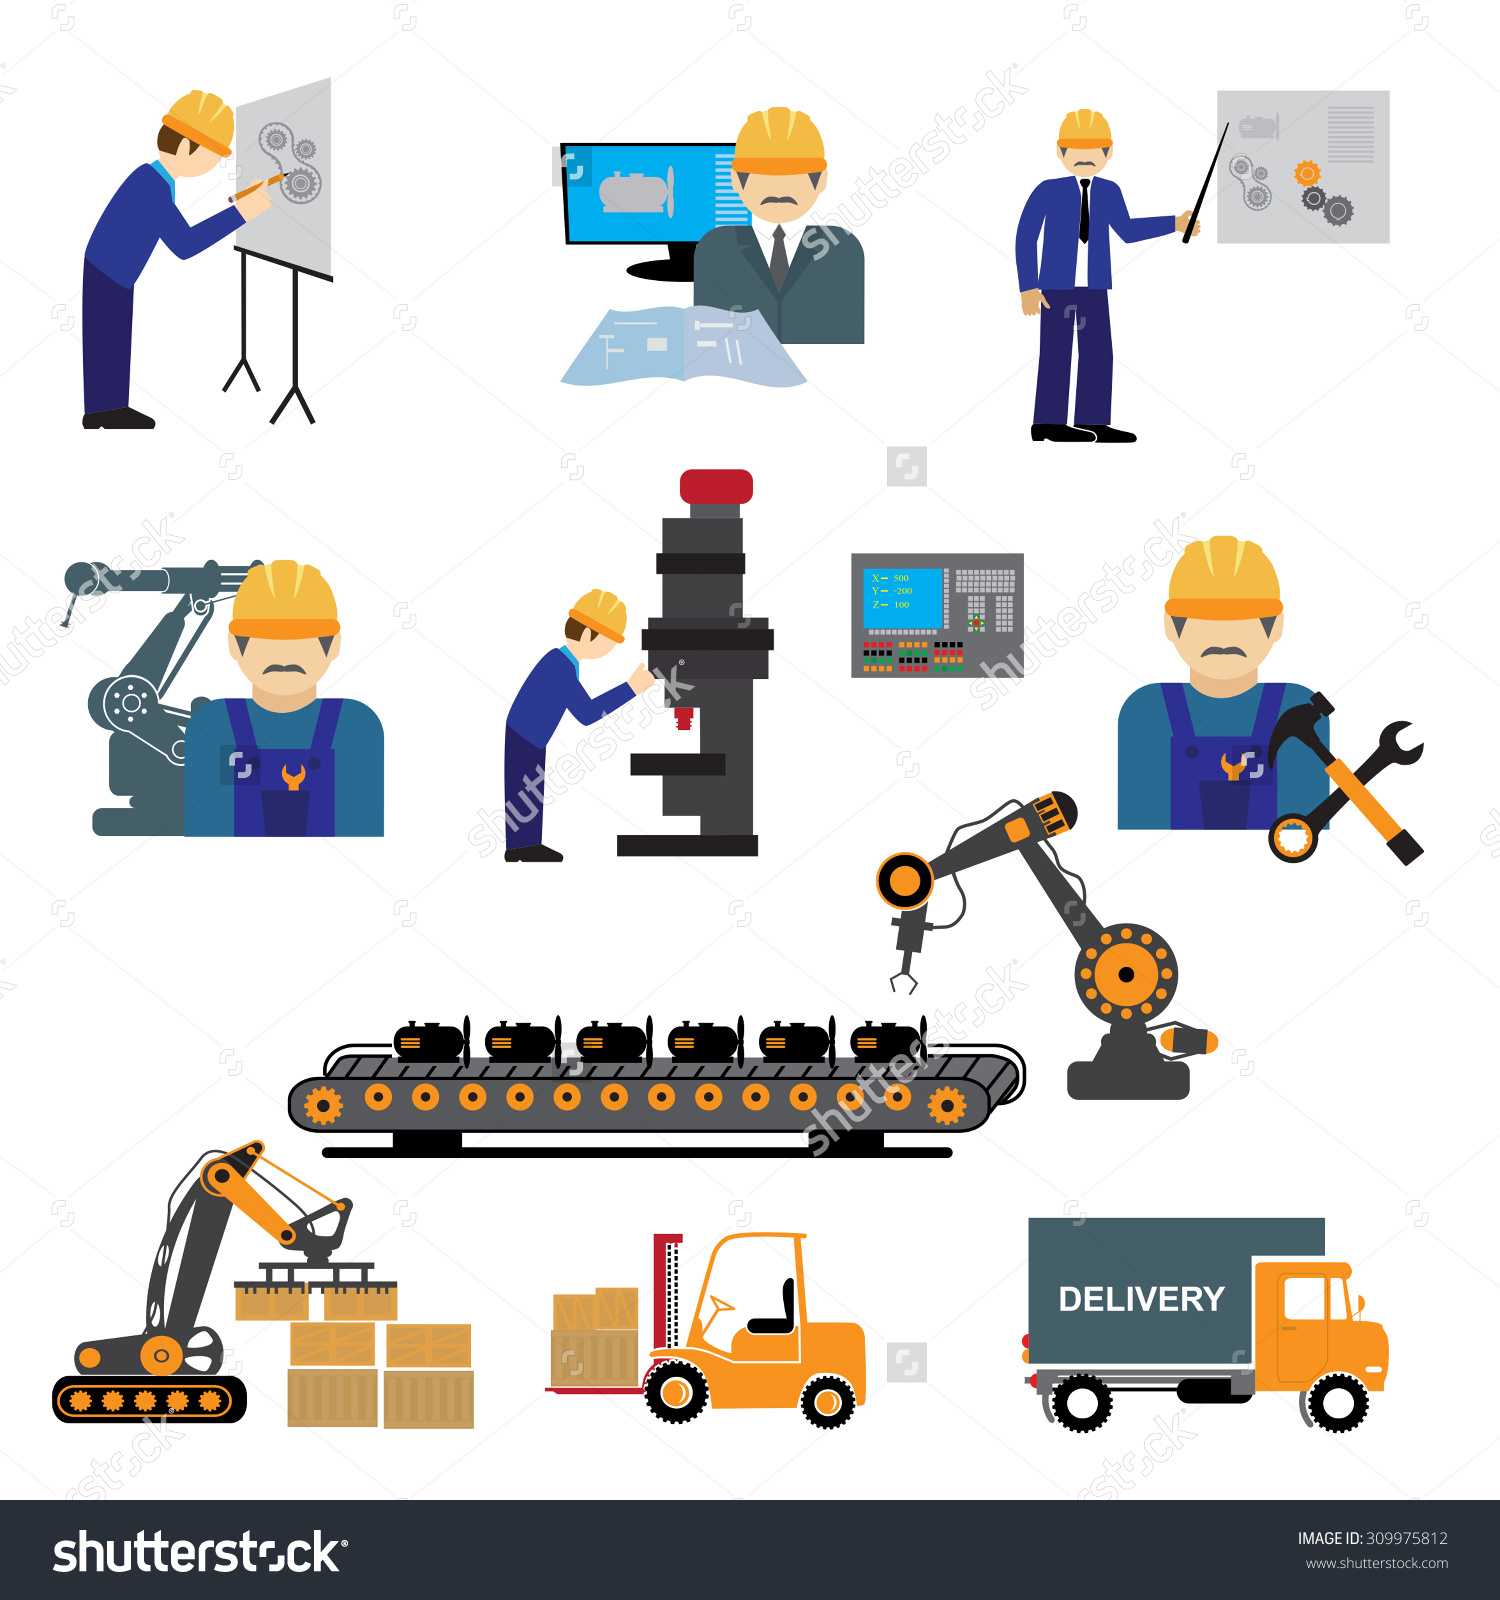 Manufacturing process clipart